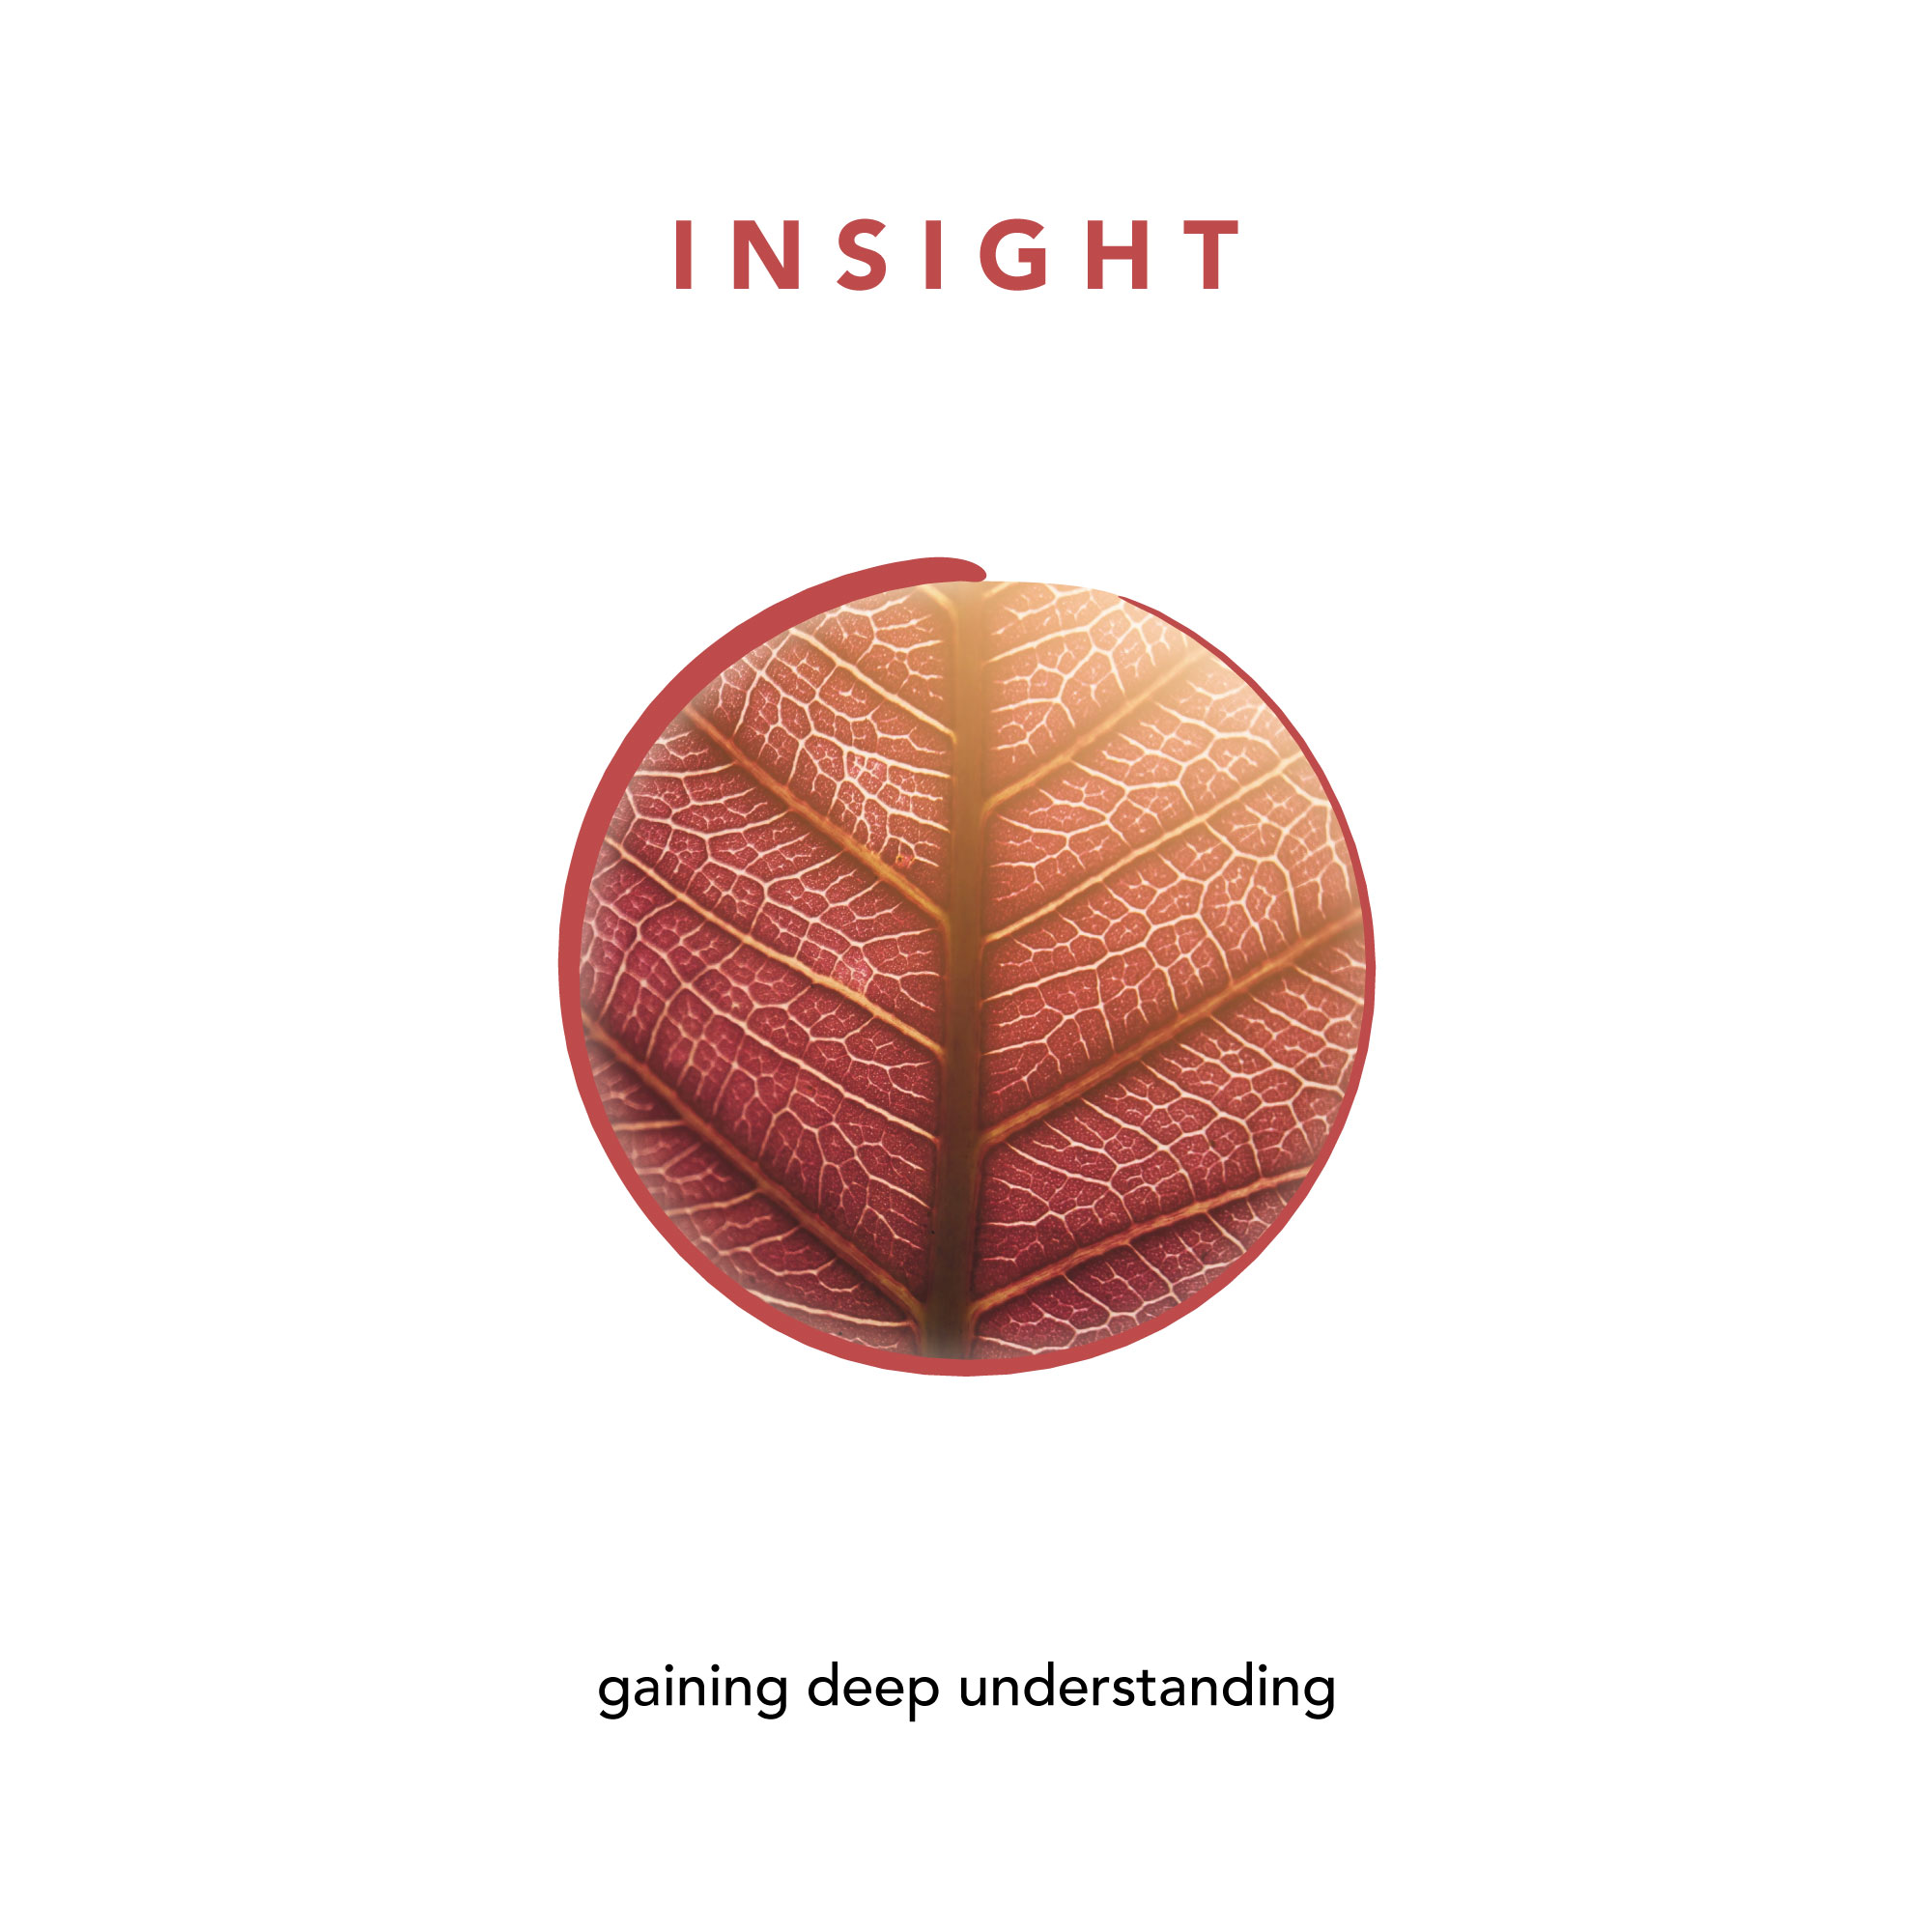 INSIGHT - gaining deep understanding by looking within